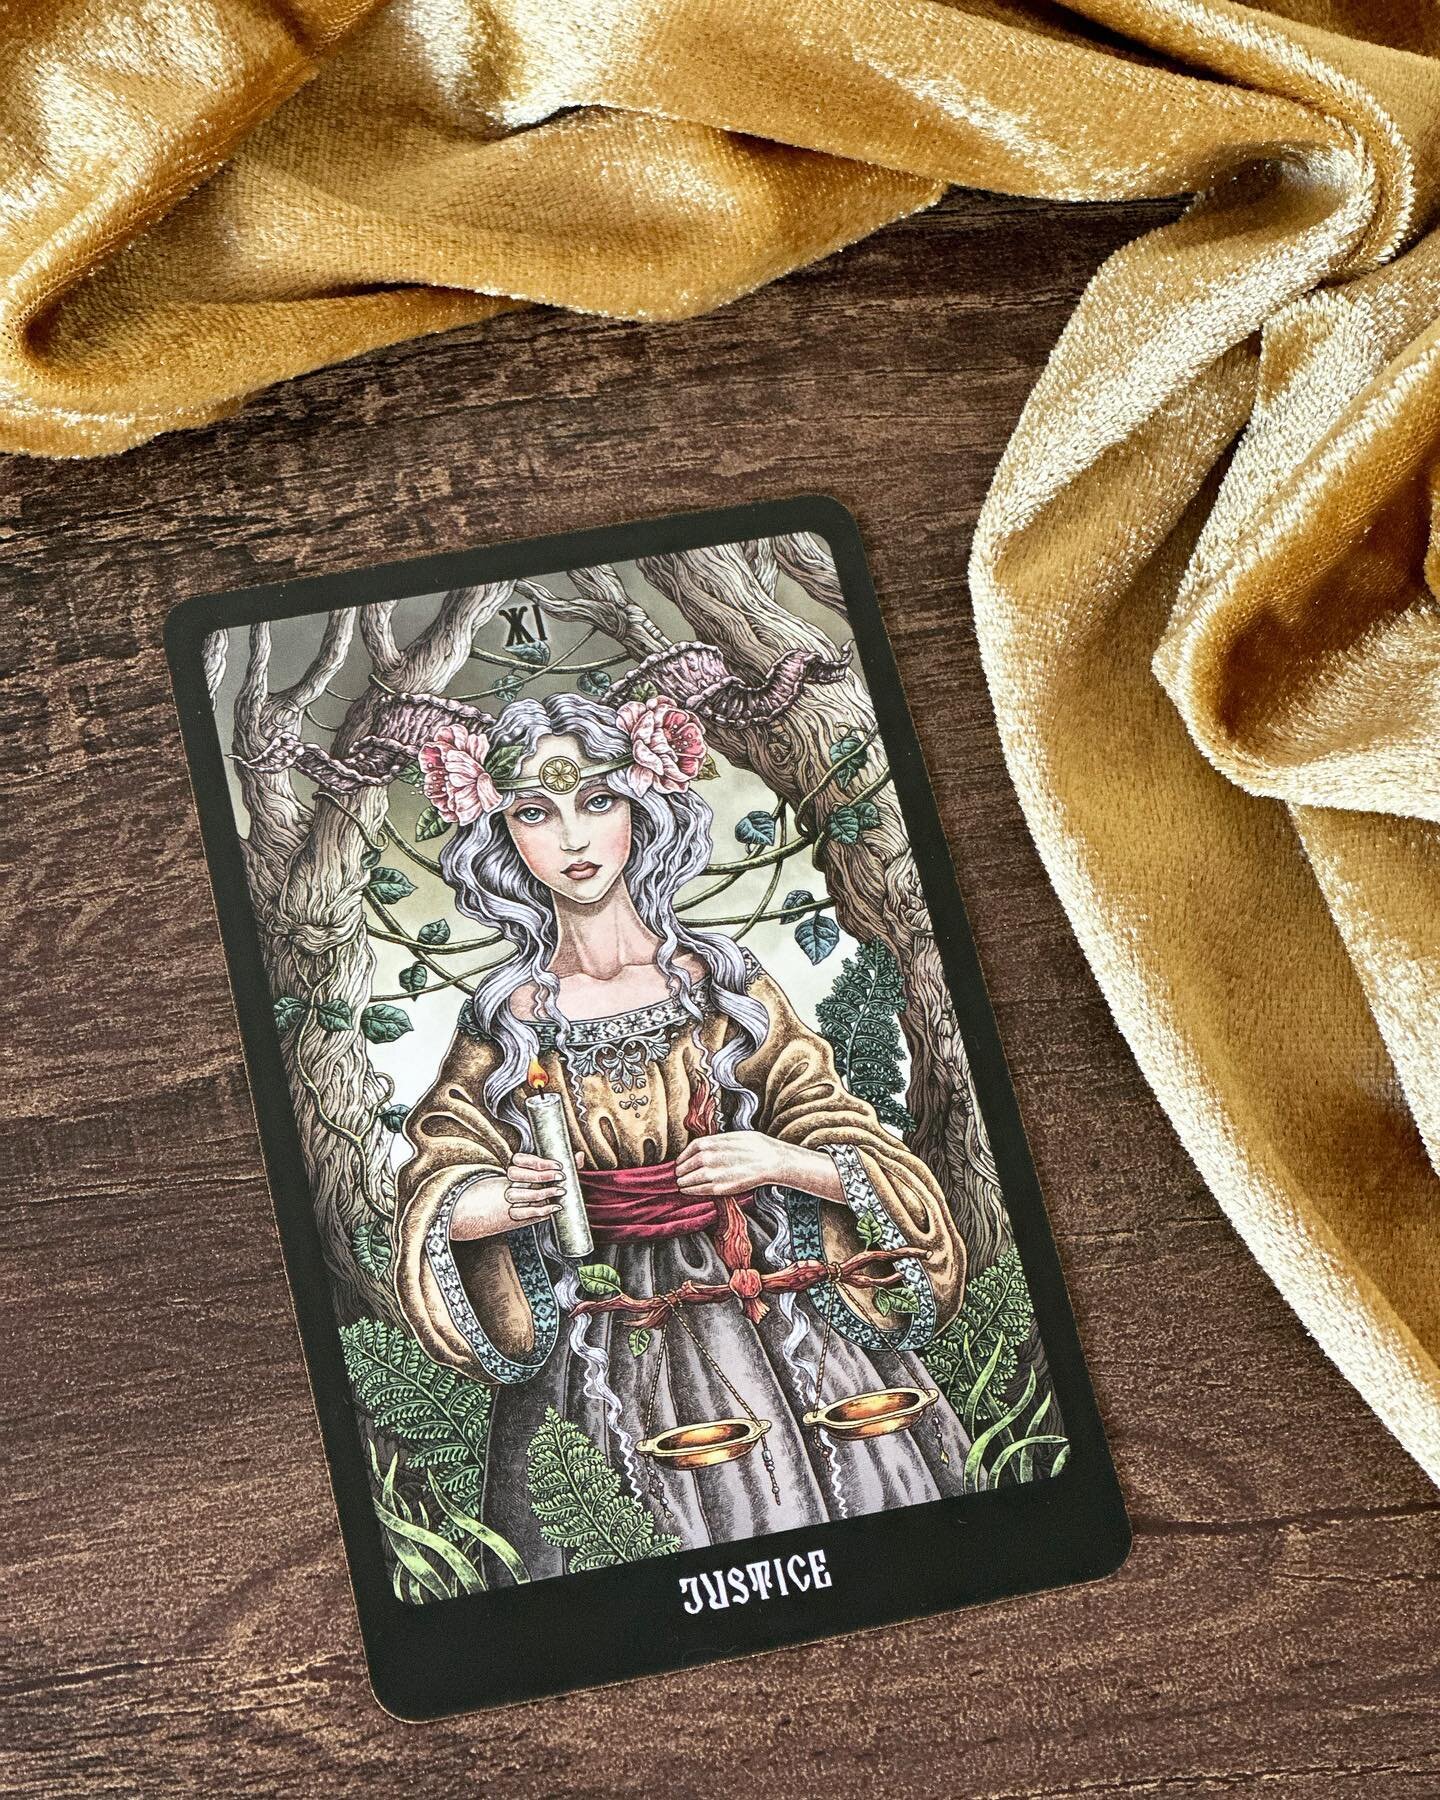 Do you have a card that&rsquo;s difficult to remember or never quite sticks? Justice was that for me! When I was learning tarot, I could not keep Justice and Judgment straight and neither of the traditional images or meanings really seemed to stick. 